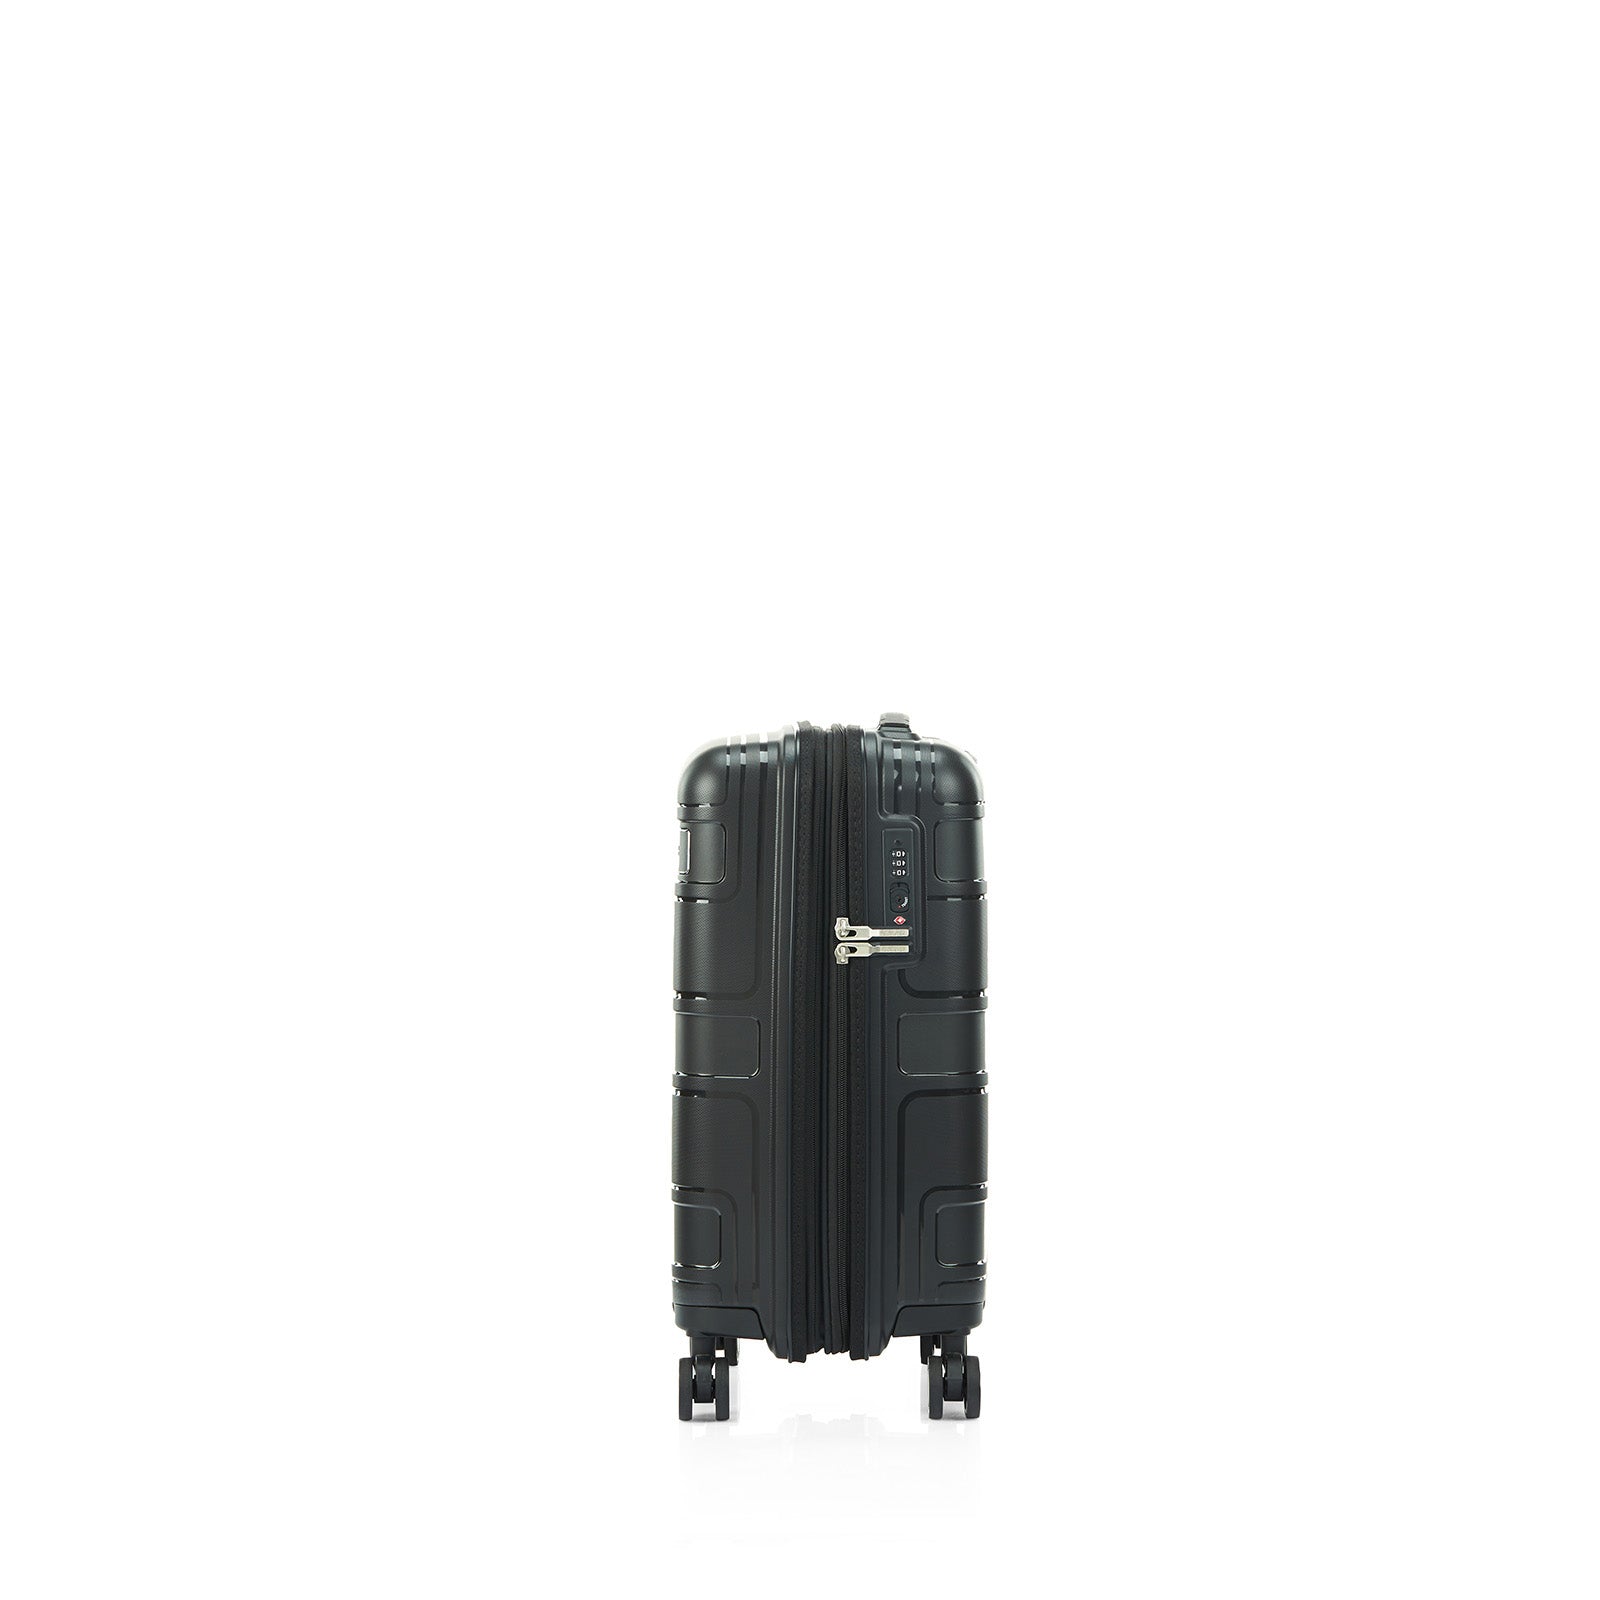 American-Tourister-Light-Max-55cm-Carry-On-Suitcase-Black-Side-Lock